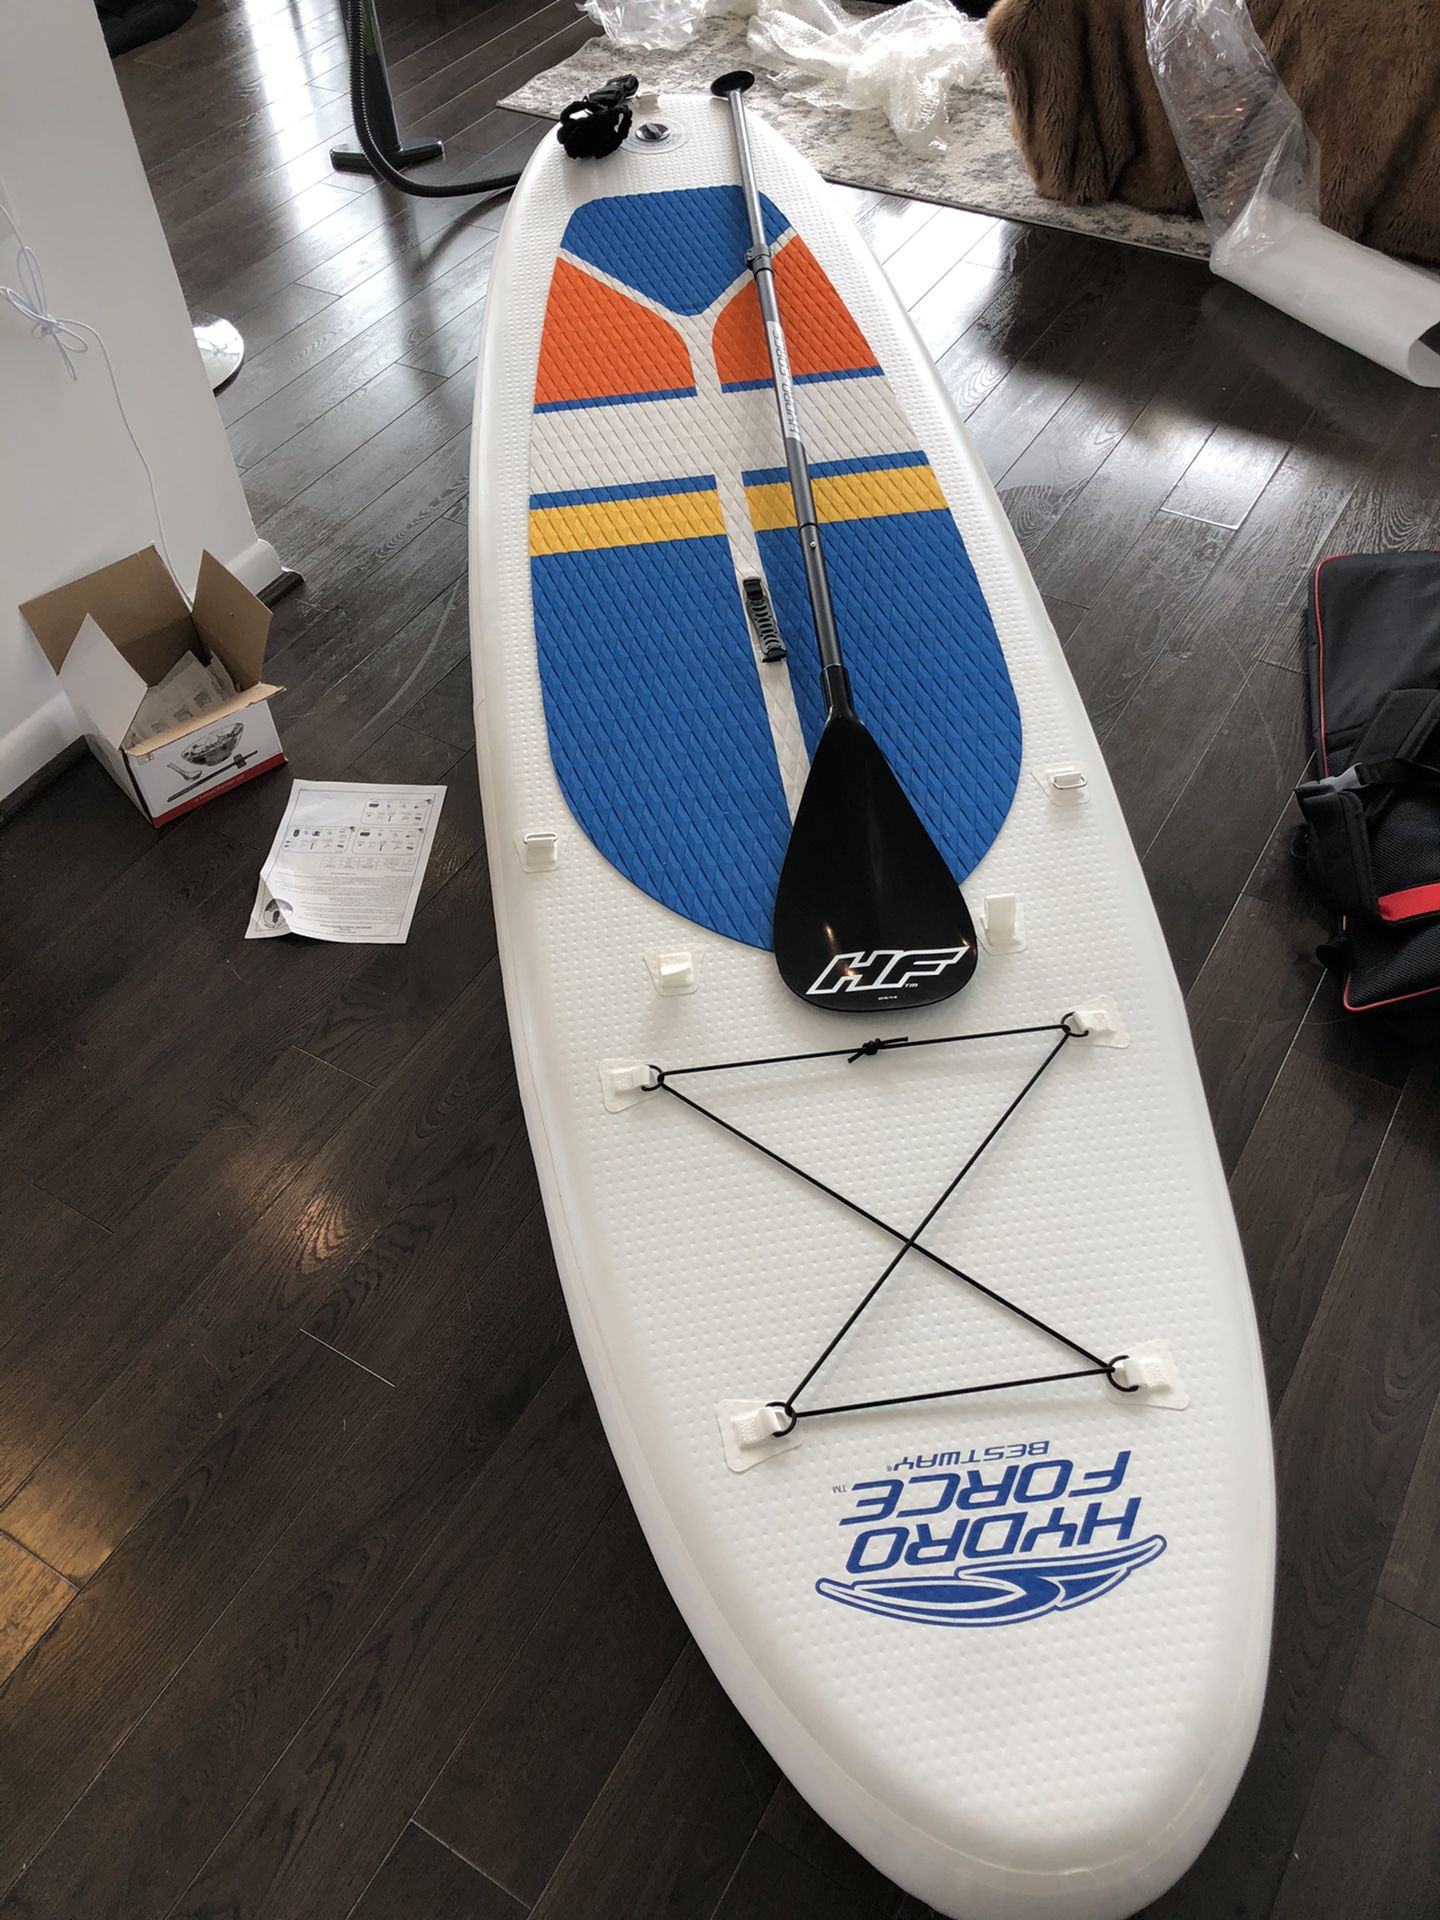 Hydro force adult paddle board